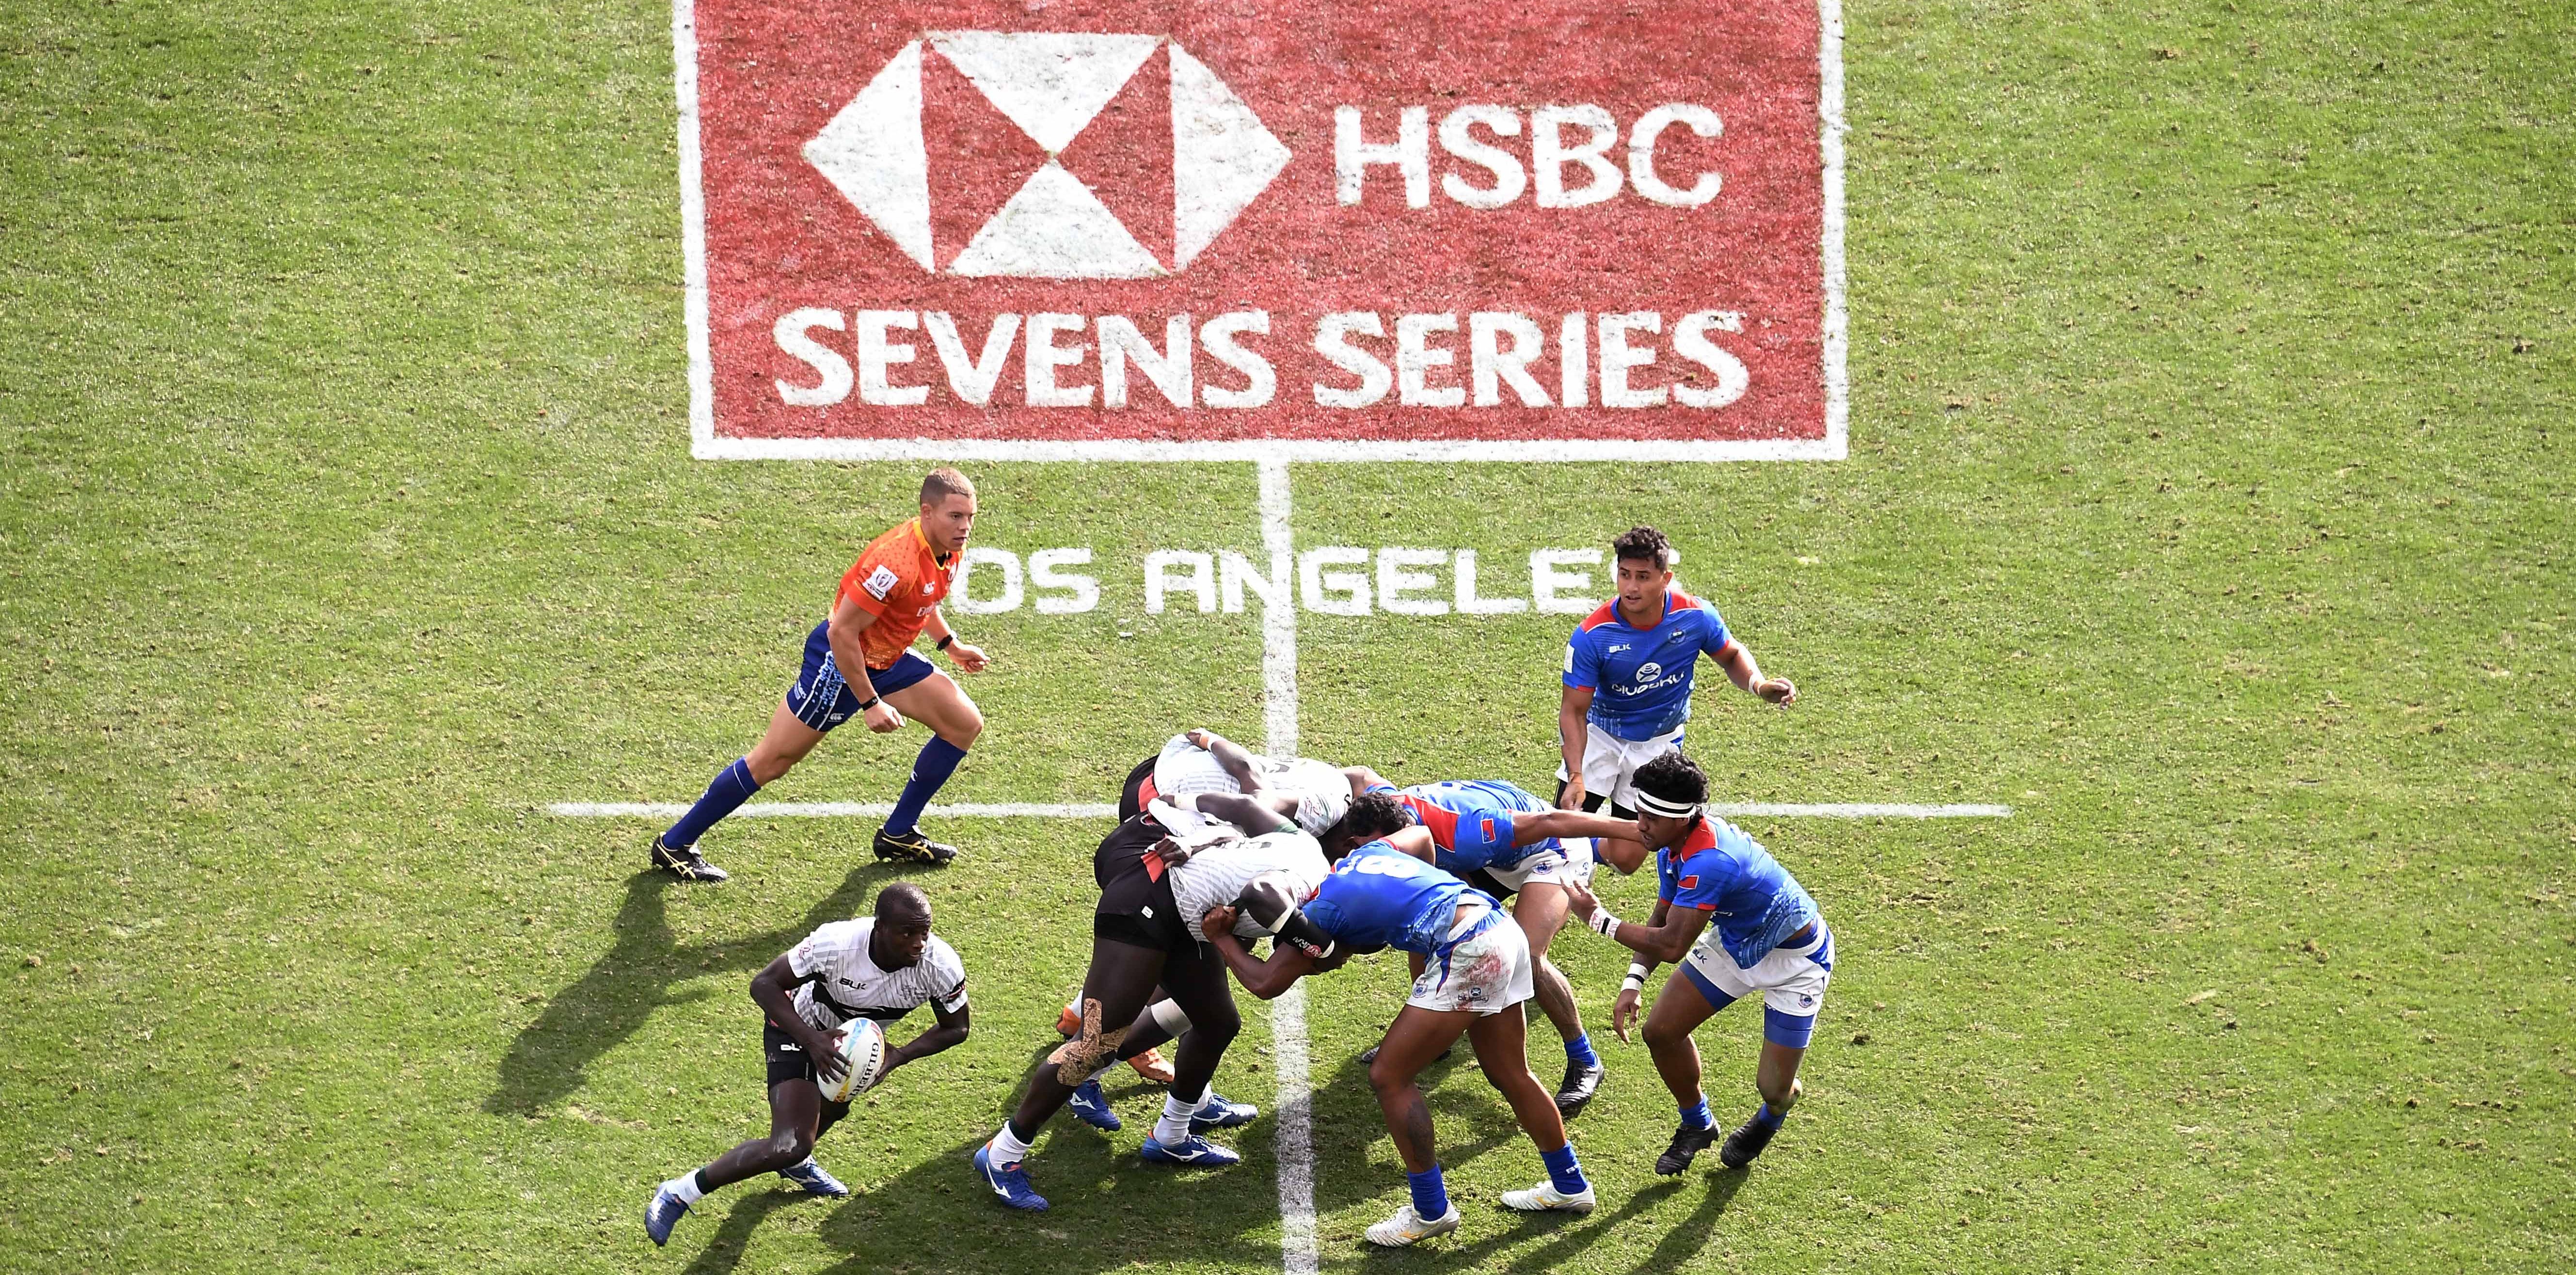 rugby sevens live stream